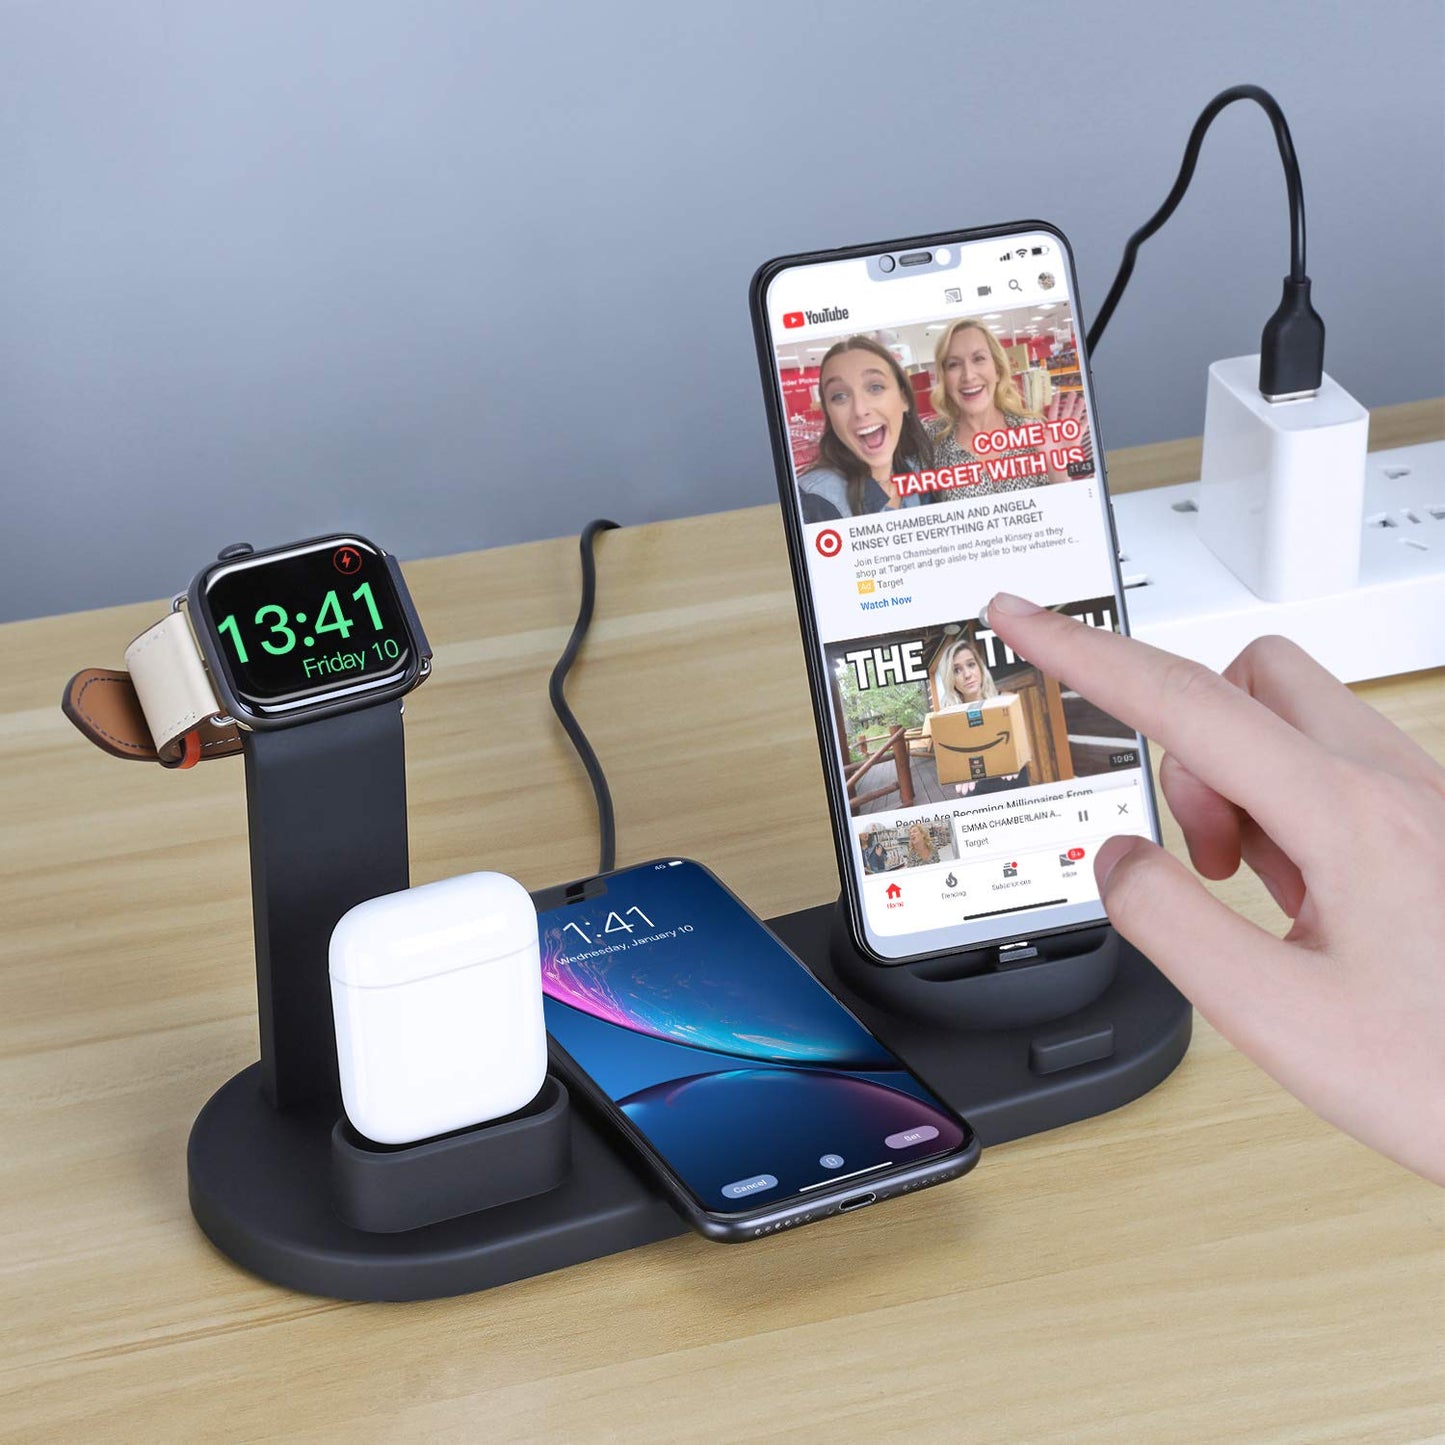 4 in 1 Wireless Smart Charging Station with Charger Dock for Smartphones (Black)